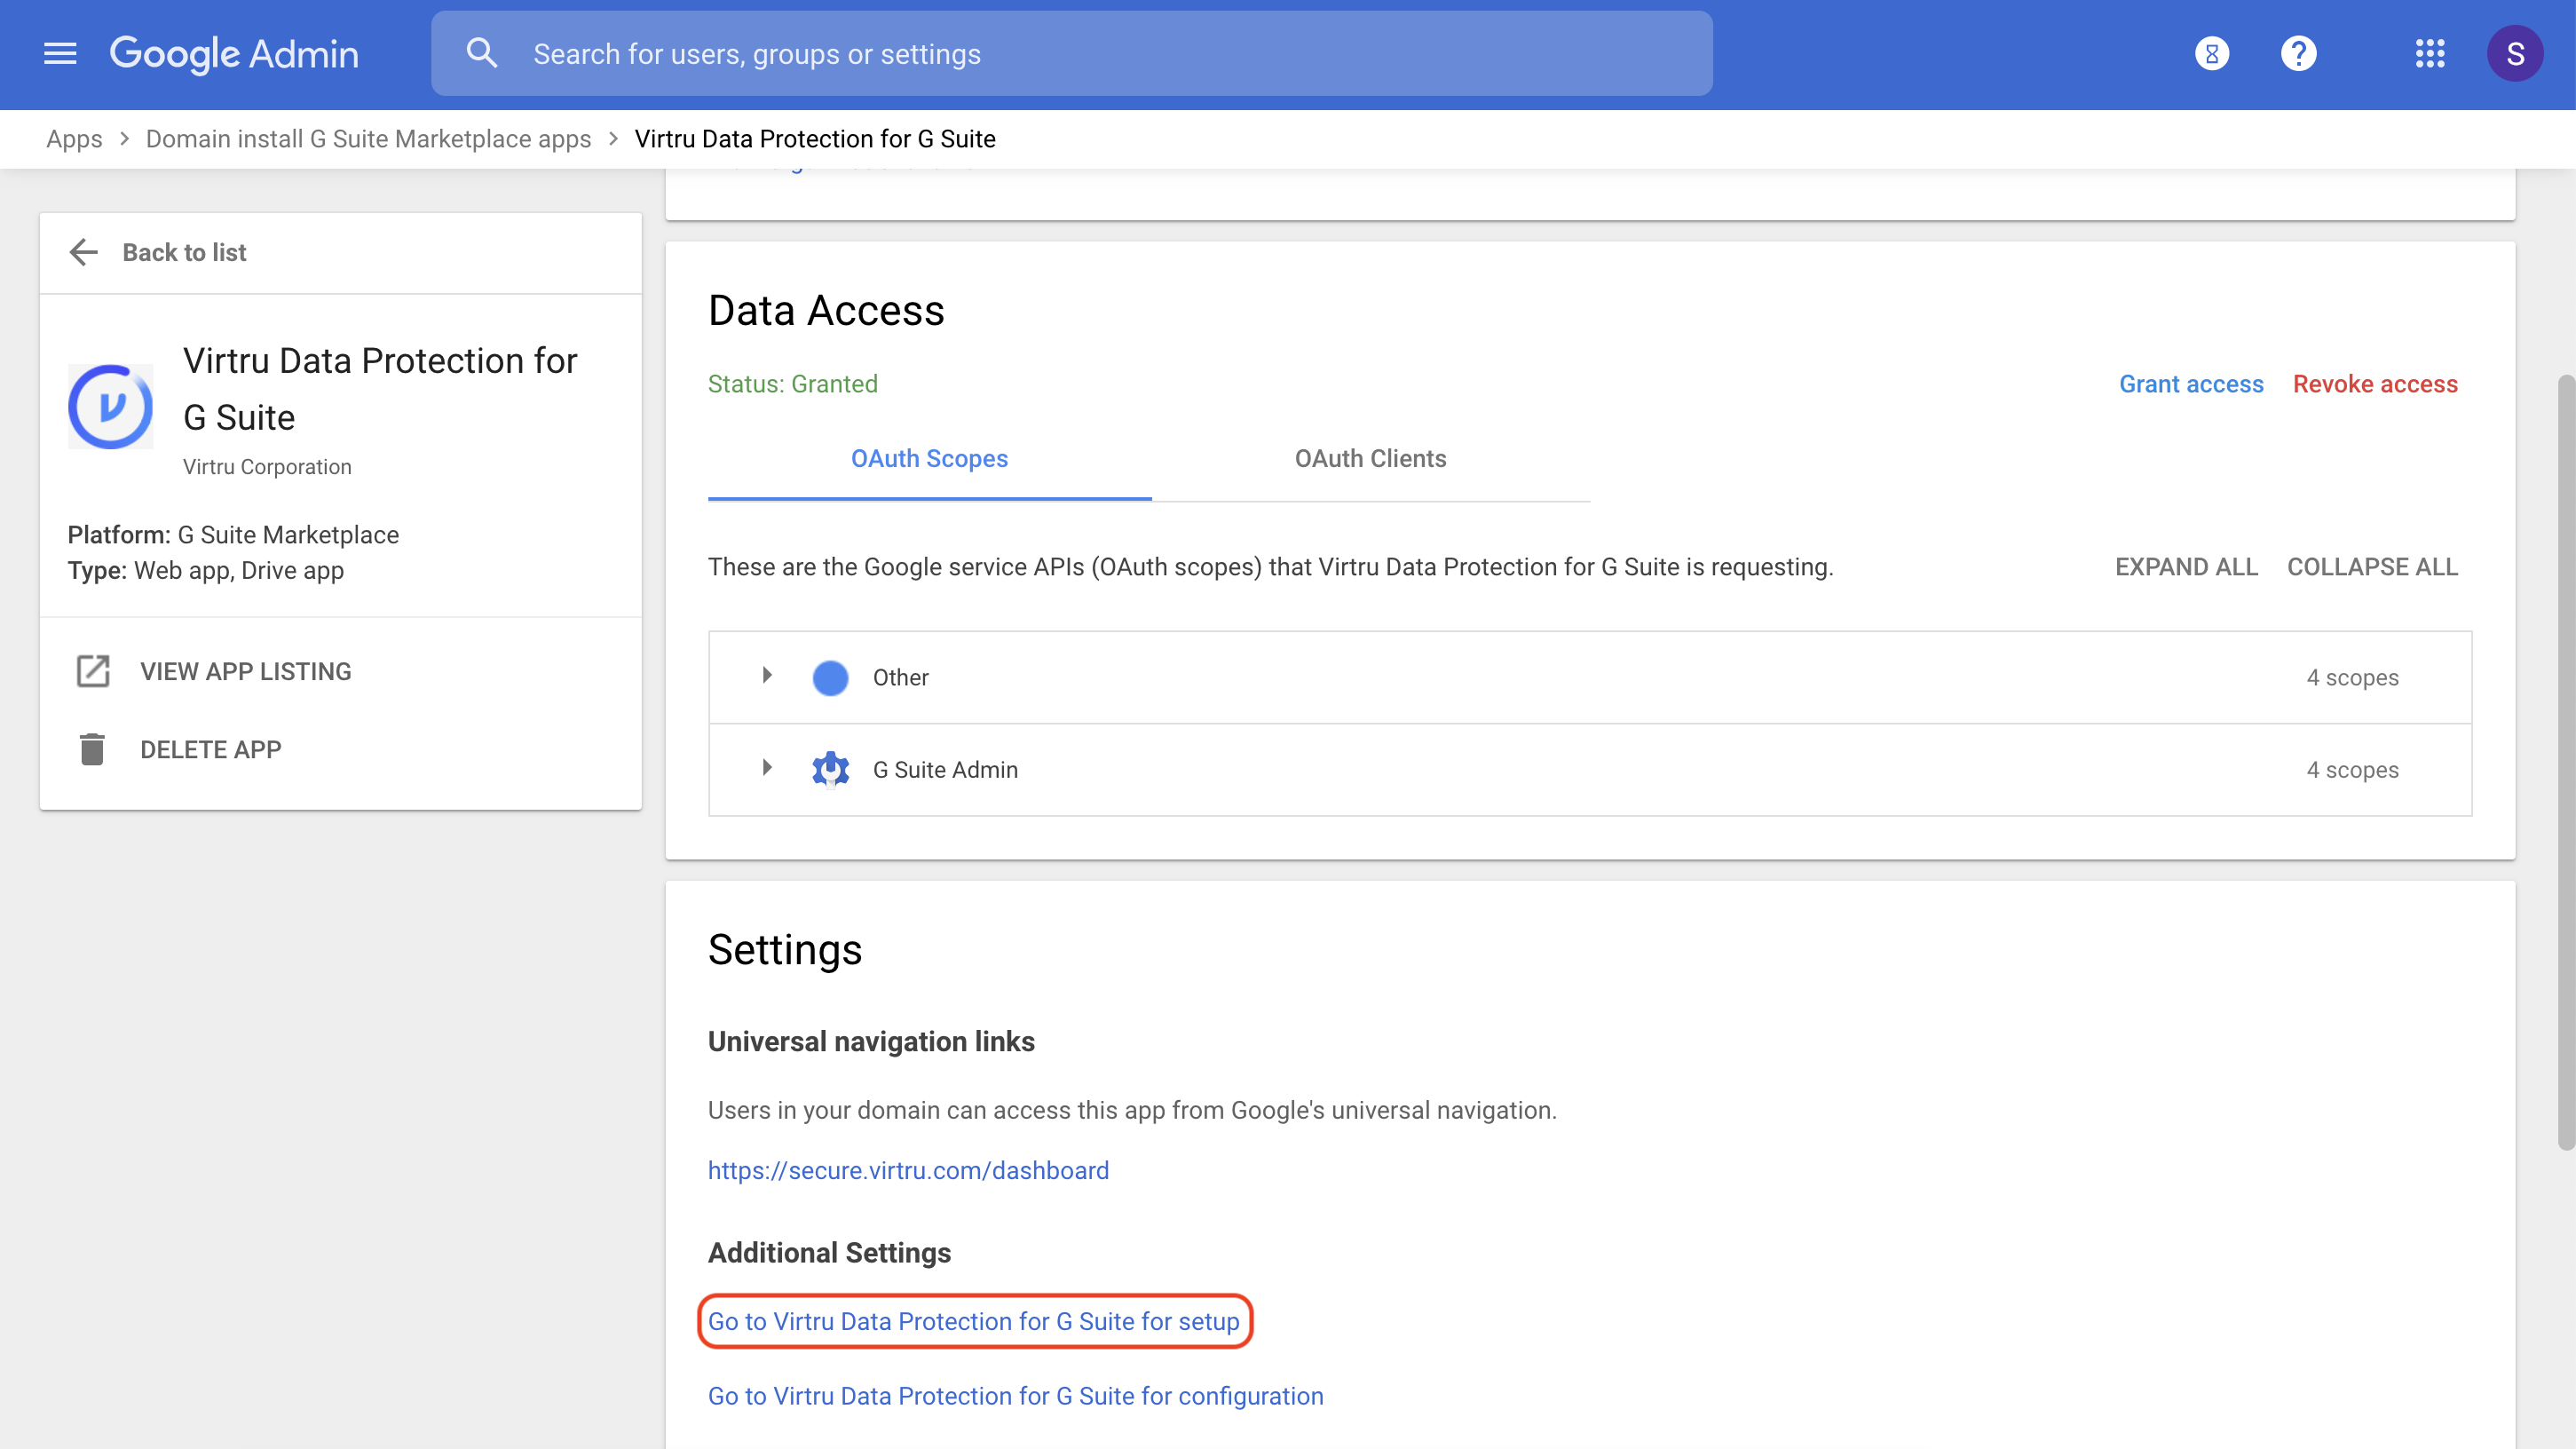 Go to Virtru Data Protection for G Suite for setup button